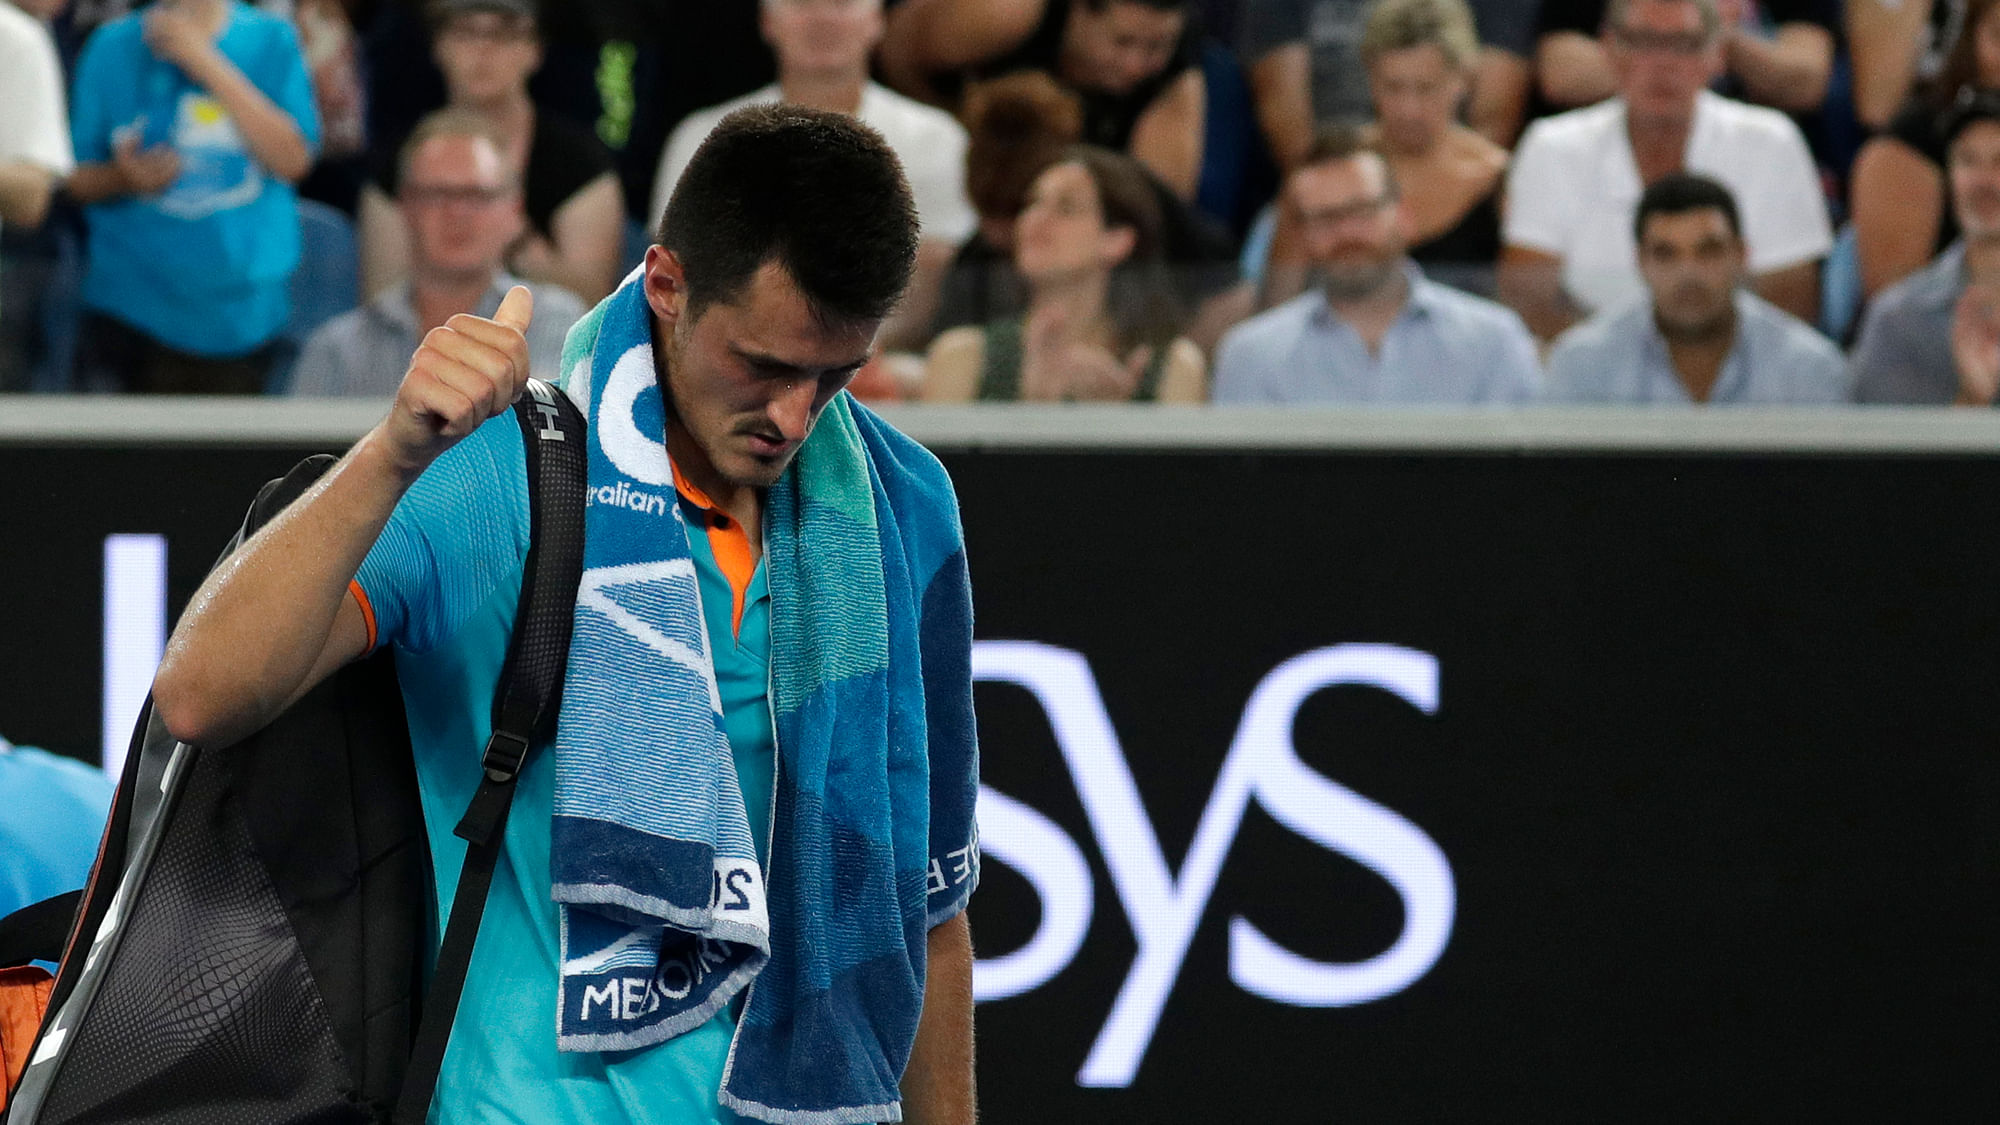 Australia’s Bernard Tomic gestures as he leaves the court following his first round loss to Croatia’s Marin Cilic at the Australian Open tennis championships in Melbourne, Australia, Monday, Jan. 14, 2019.